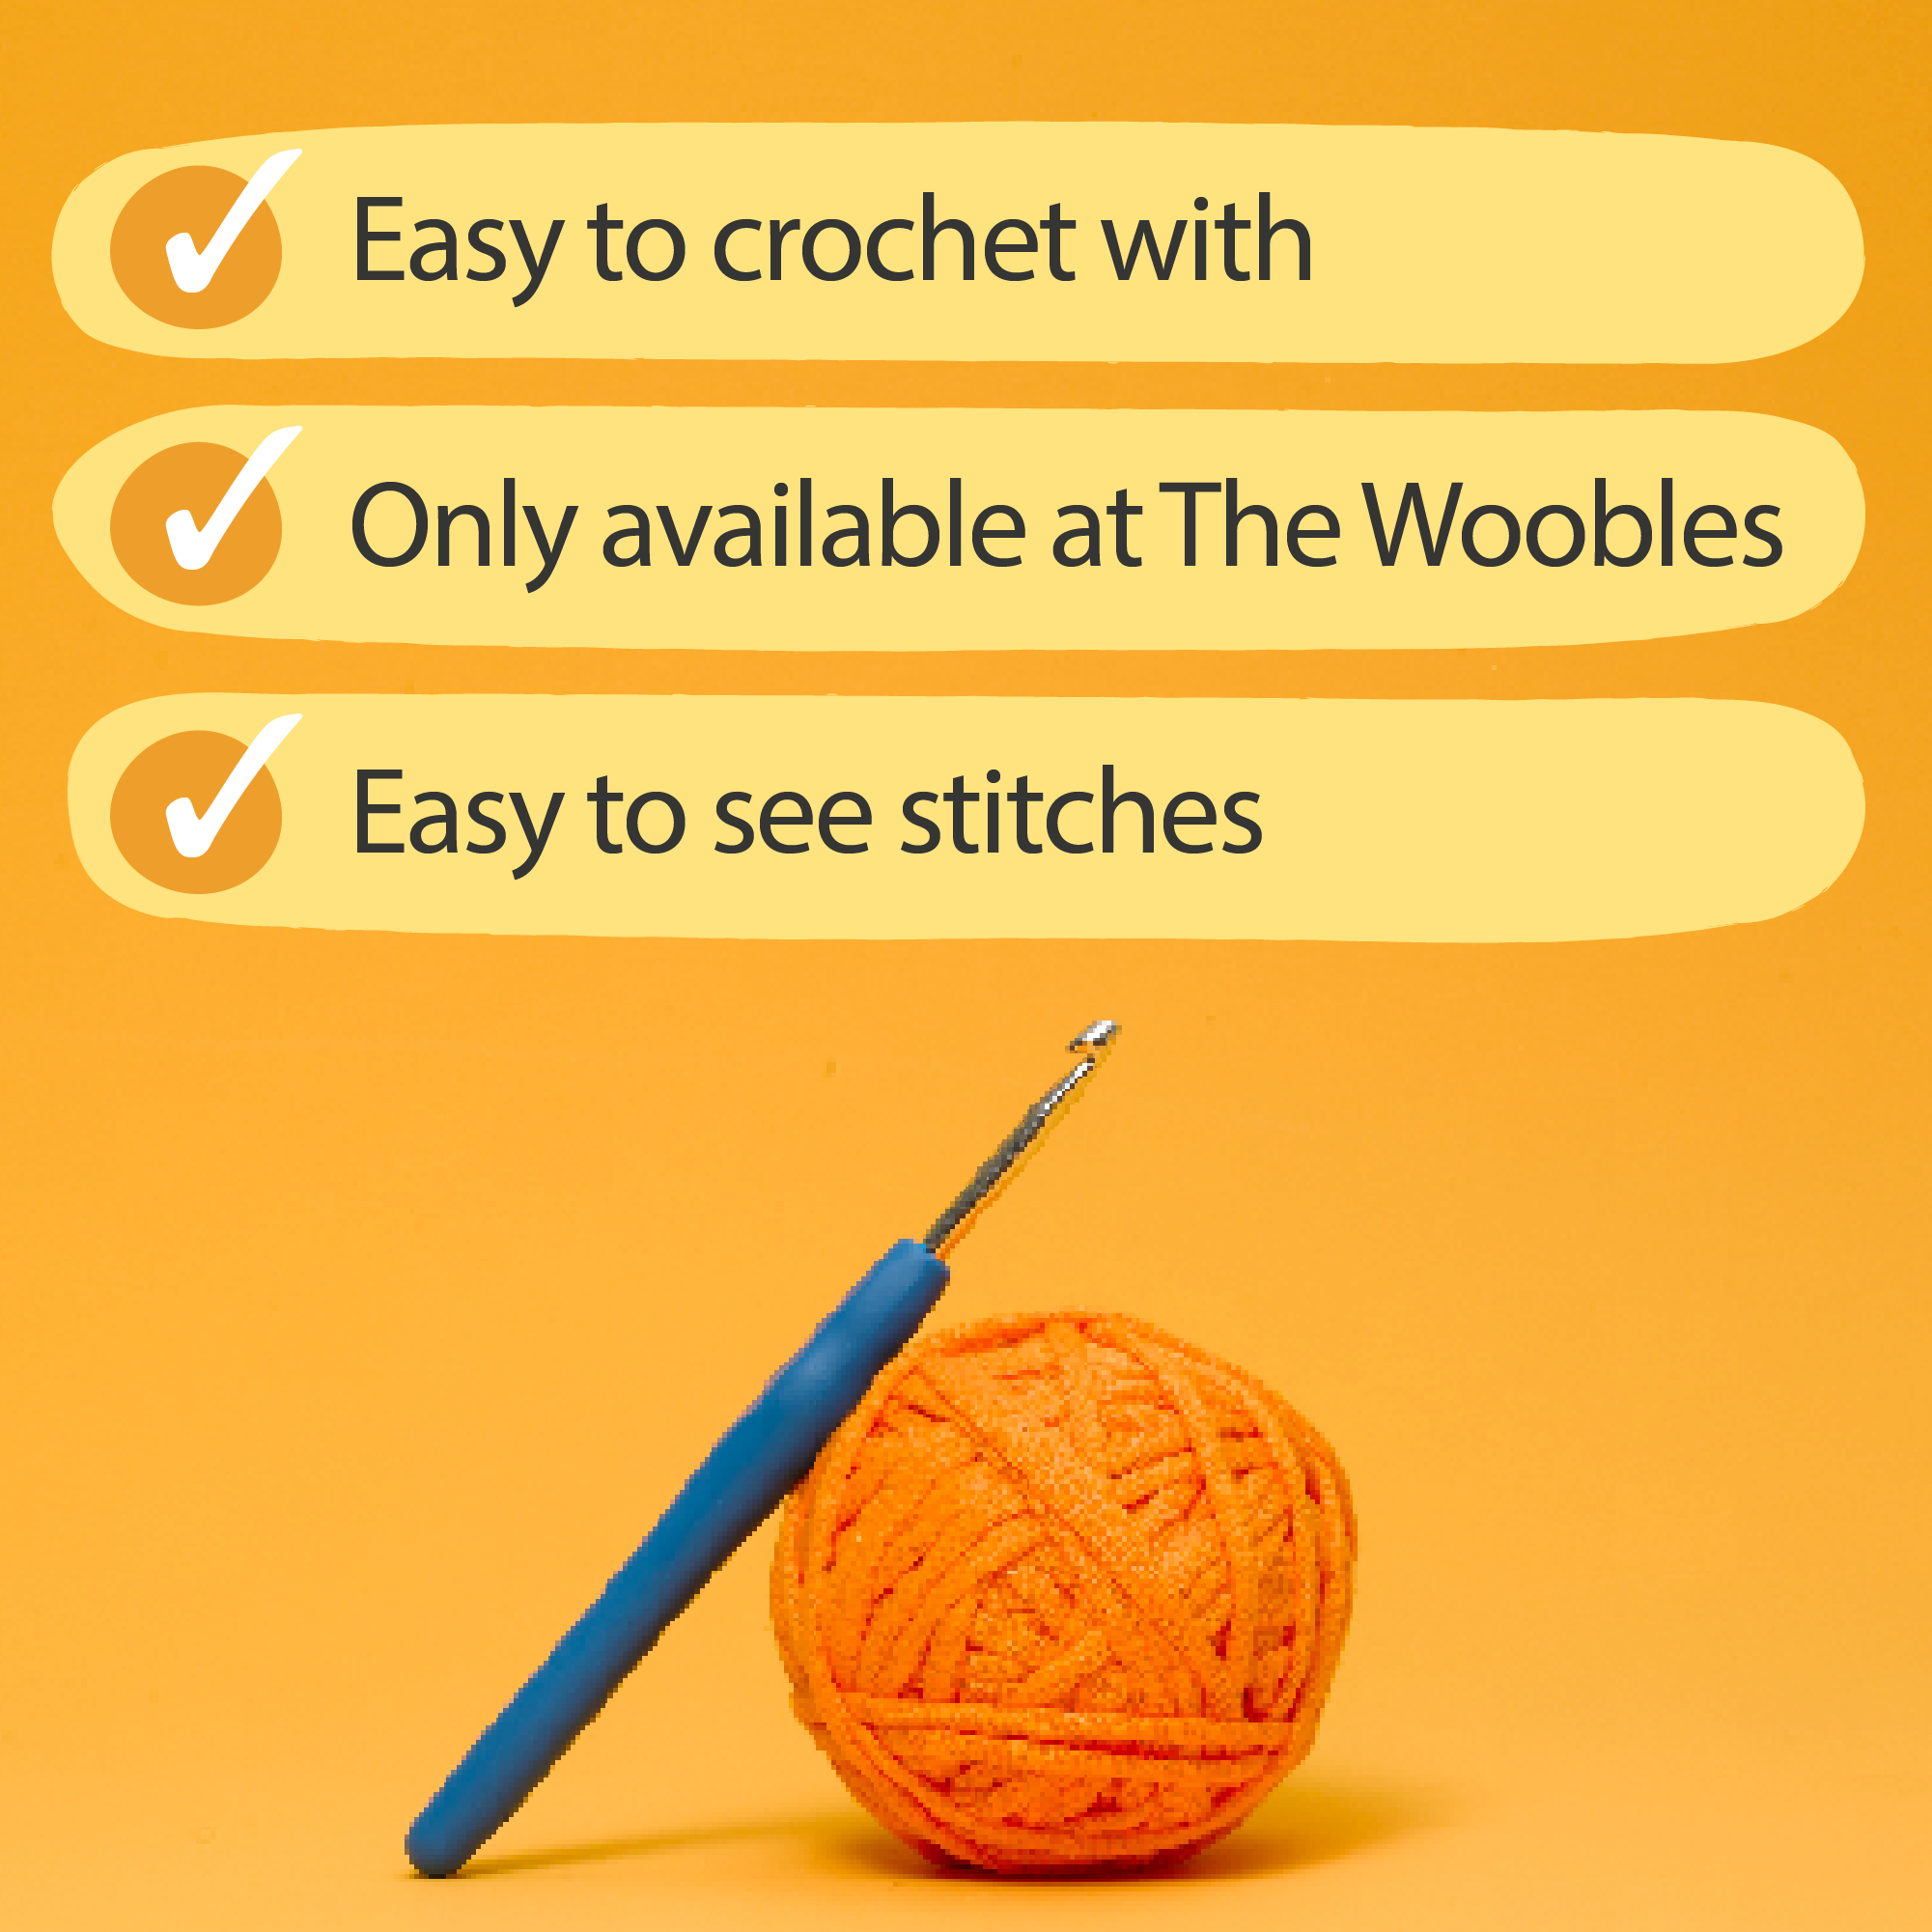 Crocheting might seem hard at first but I promise you'll get the hang , thewoobles